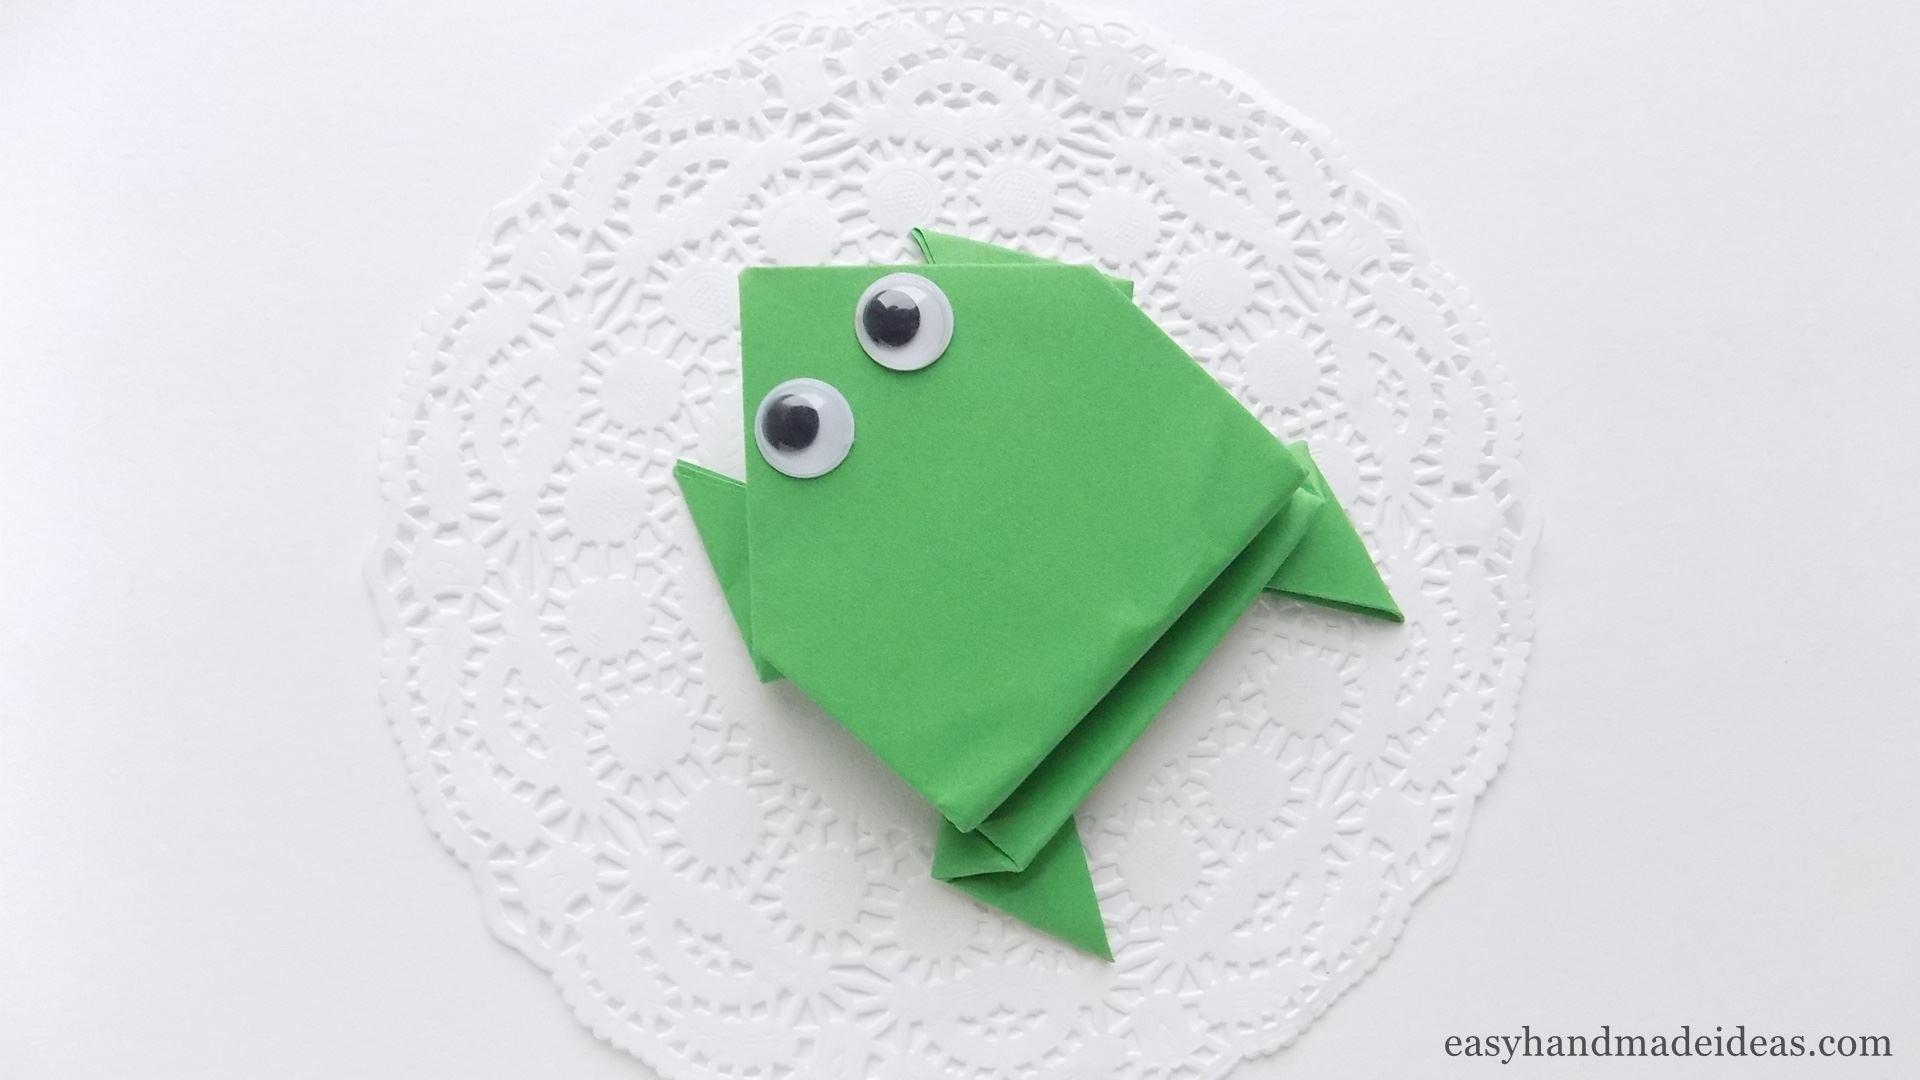 Origami jumping frog